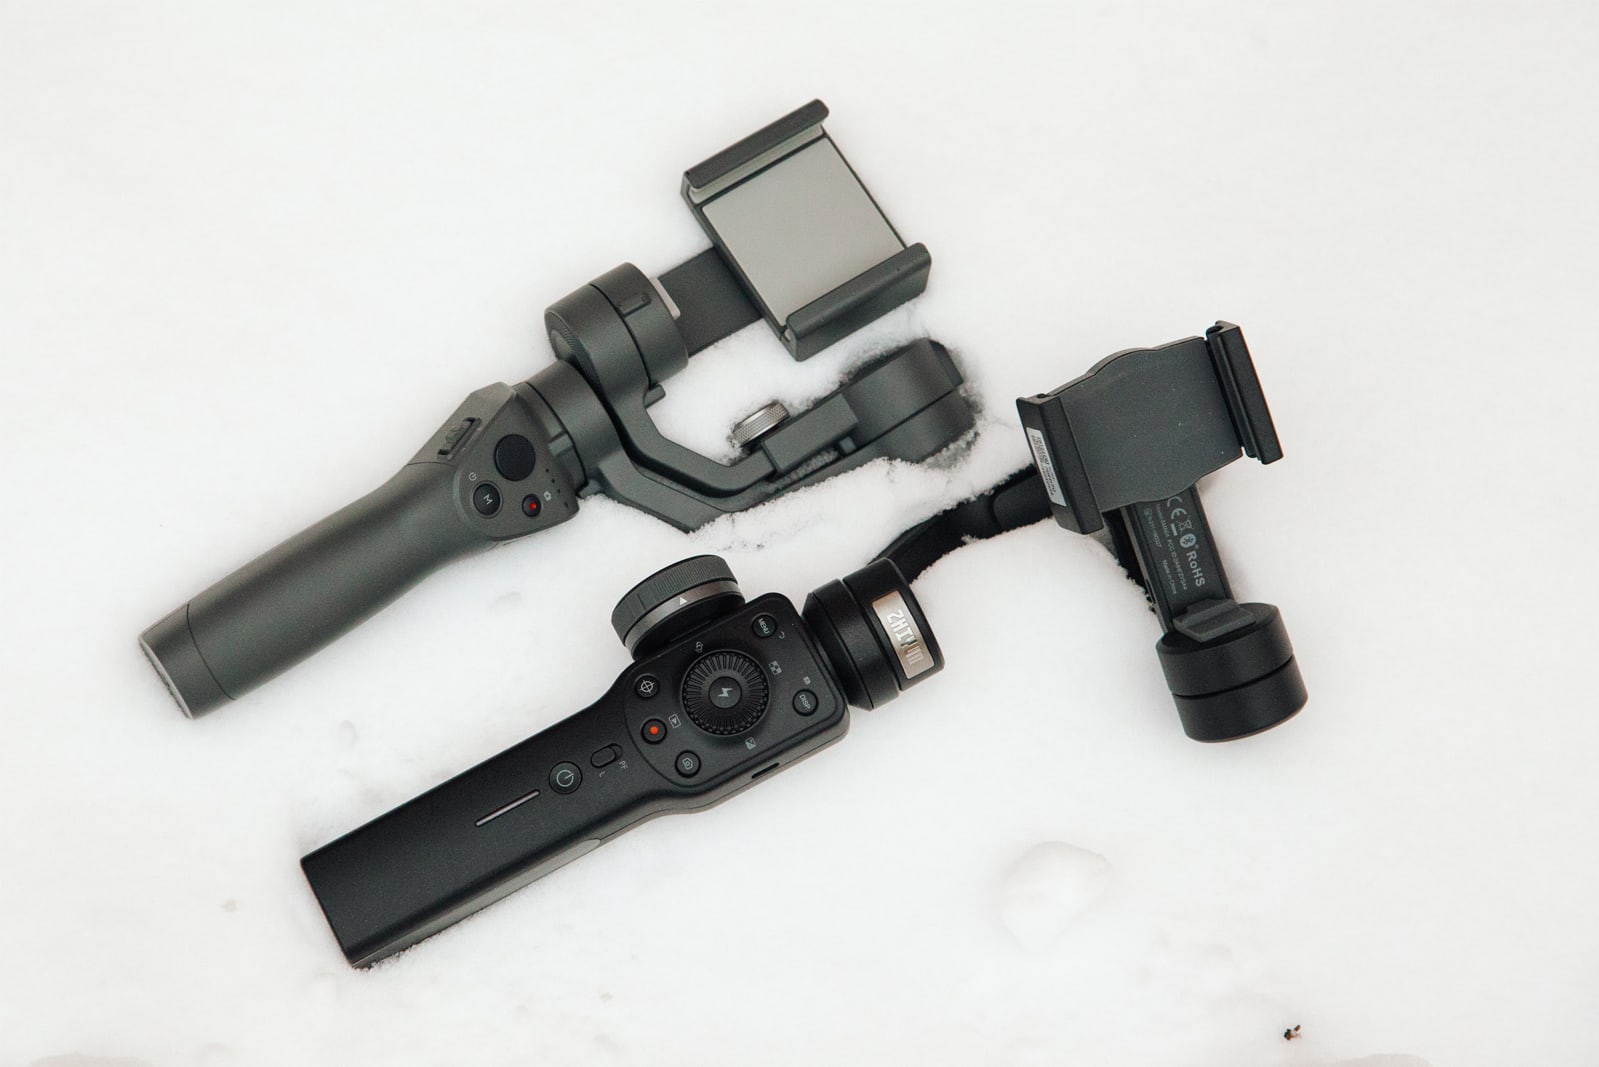 Gimbals for iPhones and Android phones